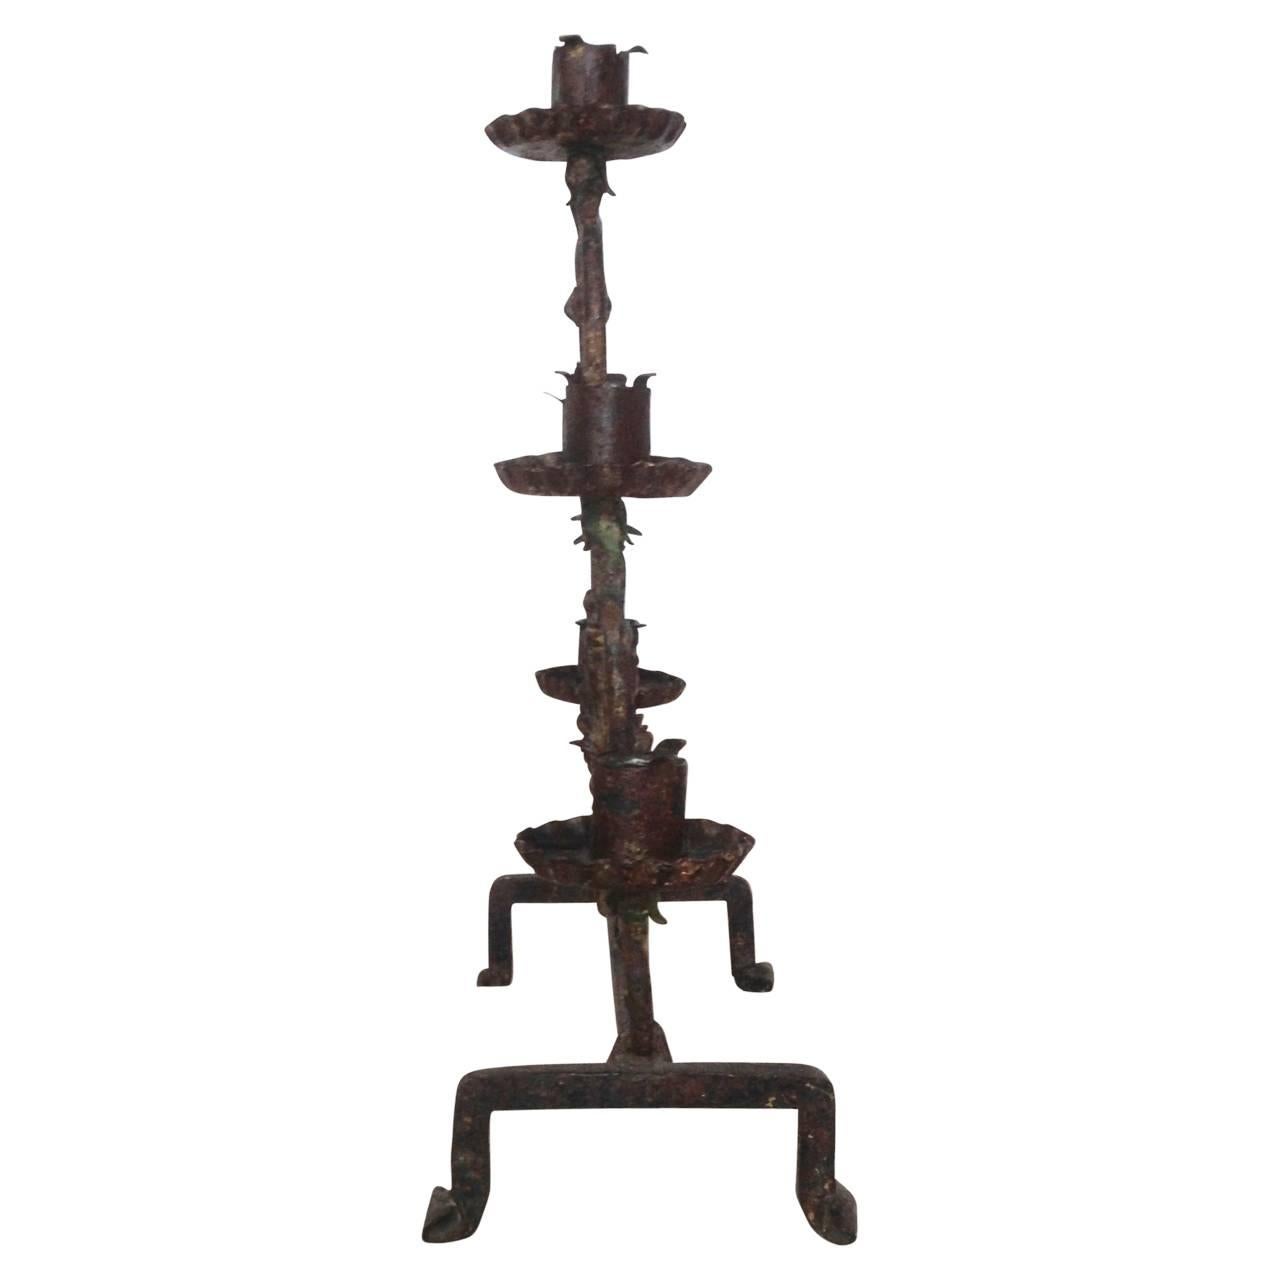 Painted Early 19th Century Fireplace Candelabra